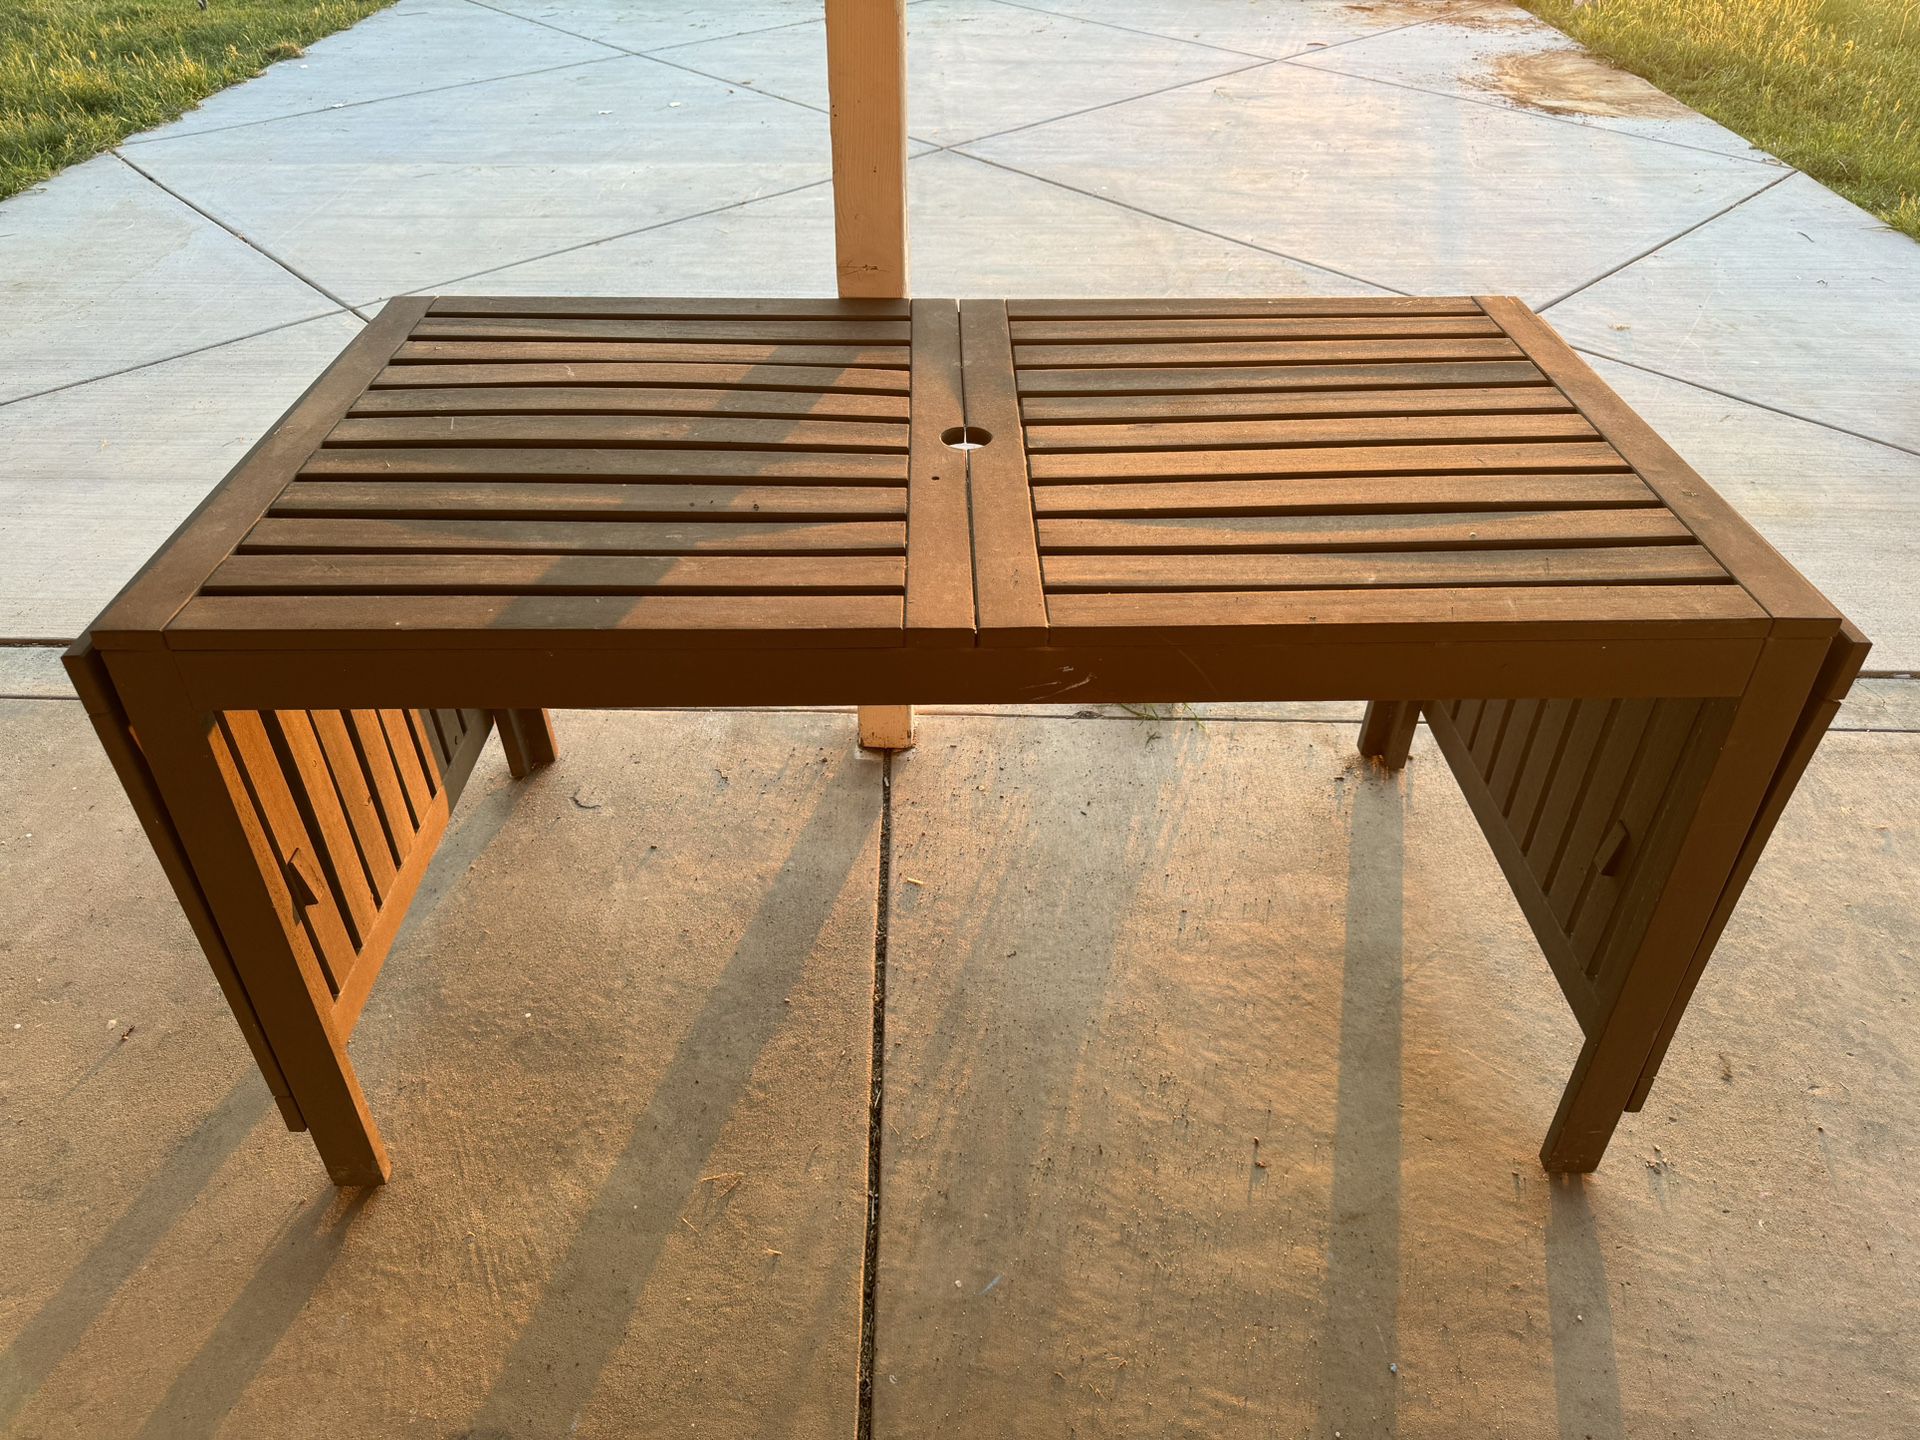 Outdoor Wood Table